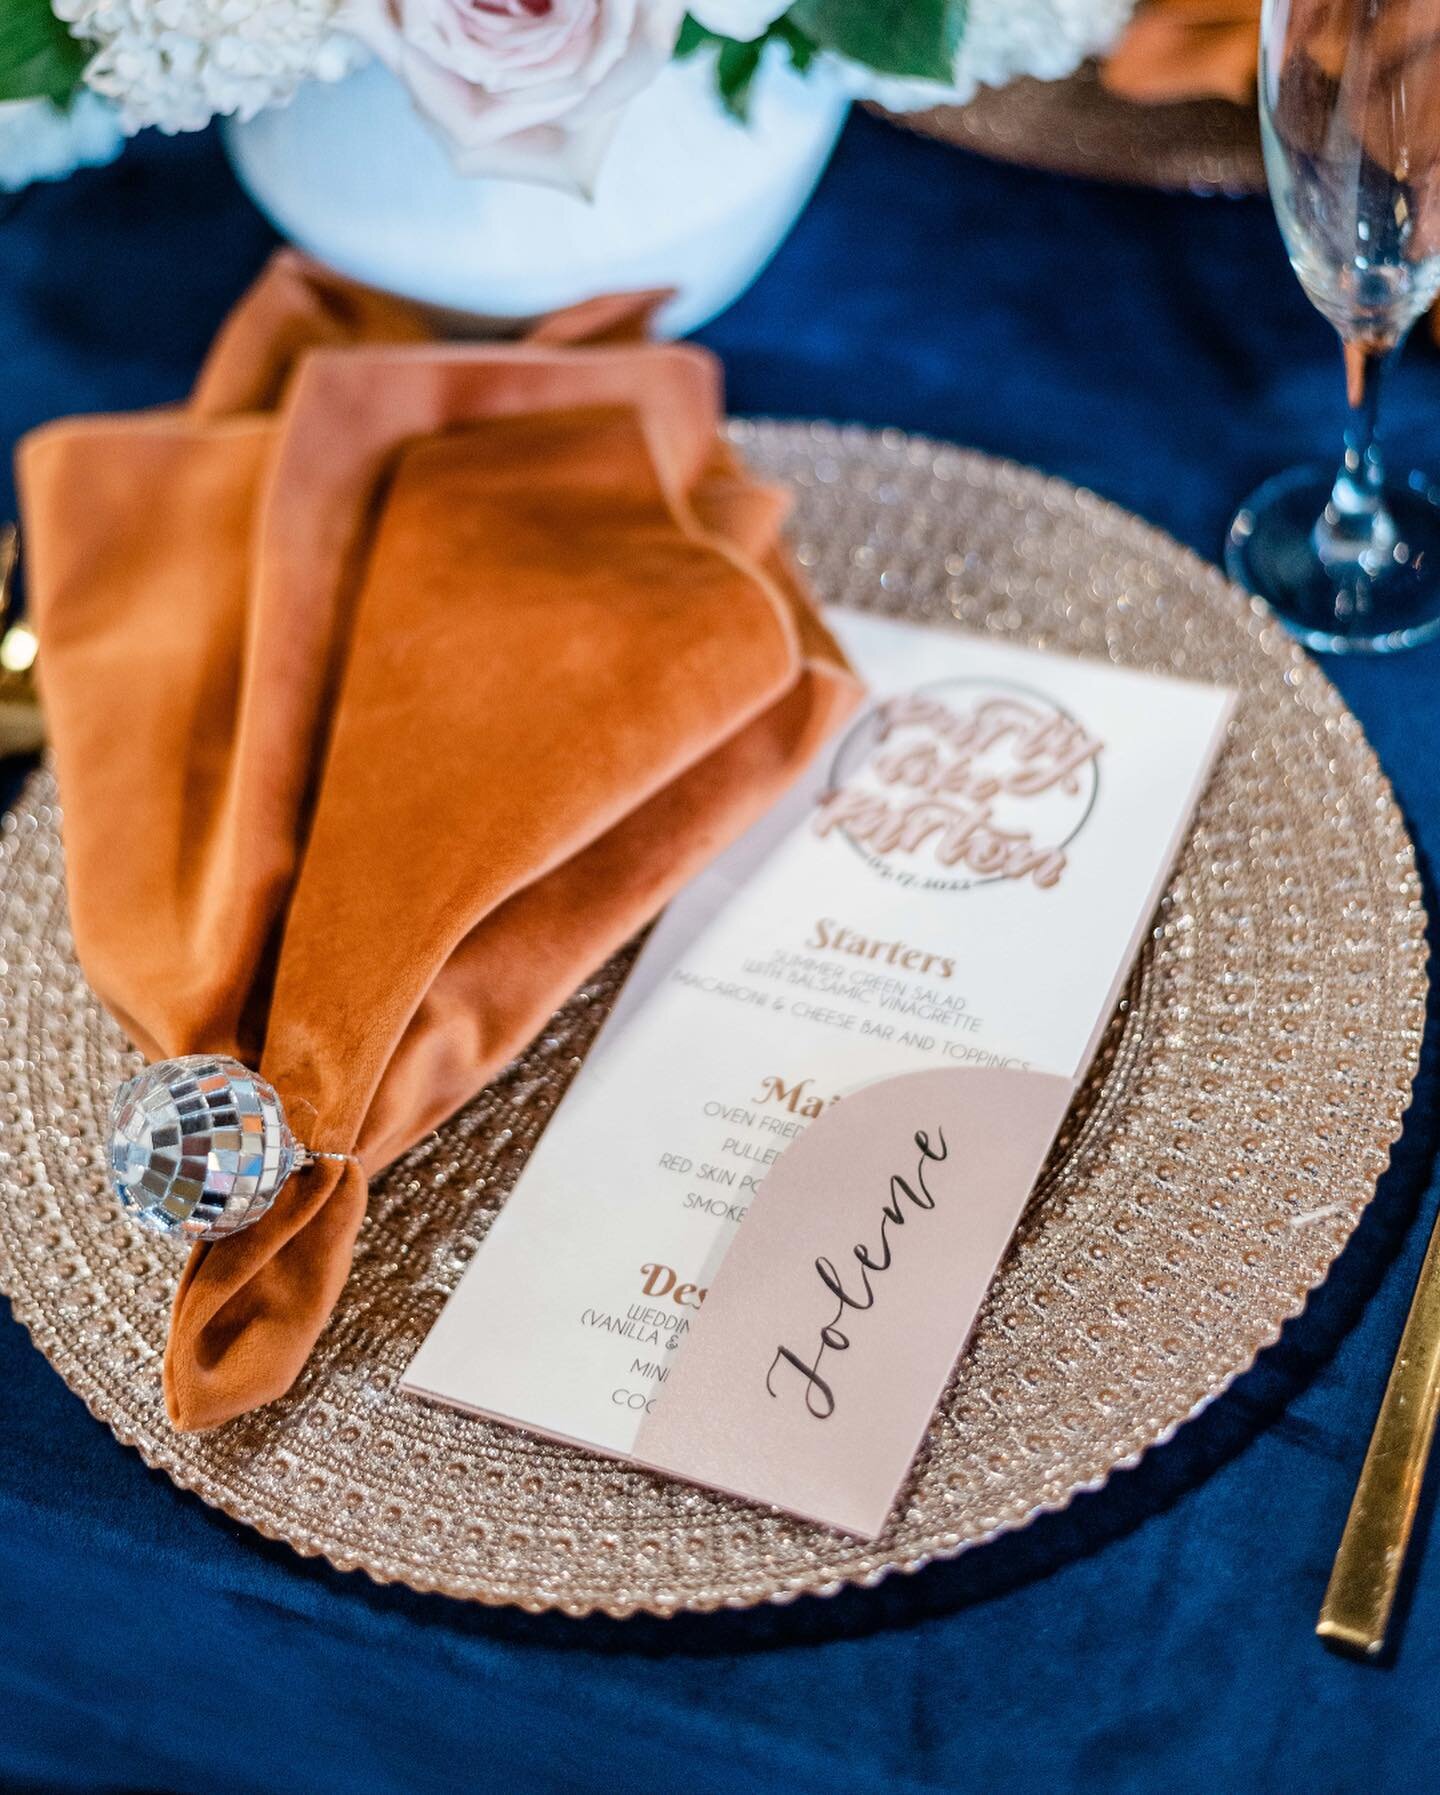 Always ask yourself: What would Dolly do?

She'd invite Jolene to her party, that's what she'd do. These calligraphy menu folders were a perfect way to add personalization while leveling up a simple paper menu. 

Venue: @thebrightsidedayton 
Planning